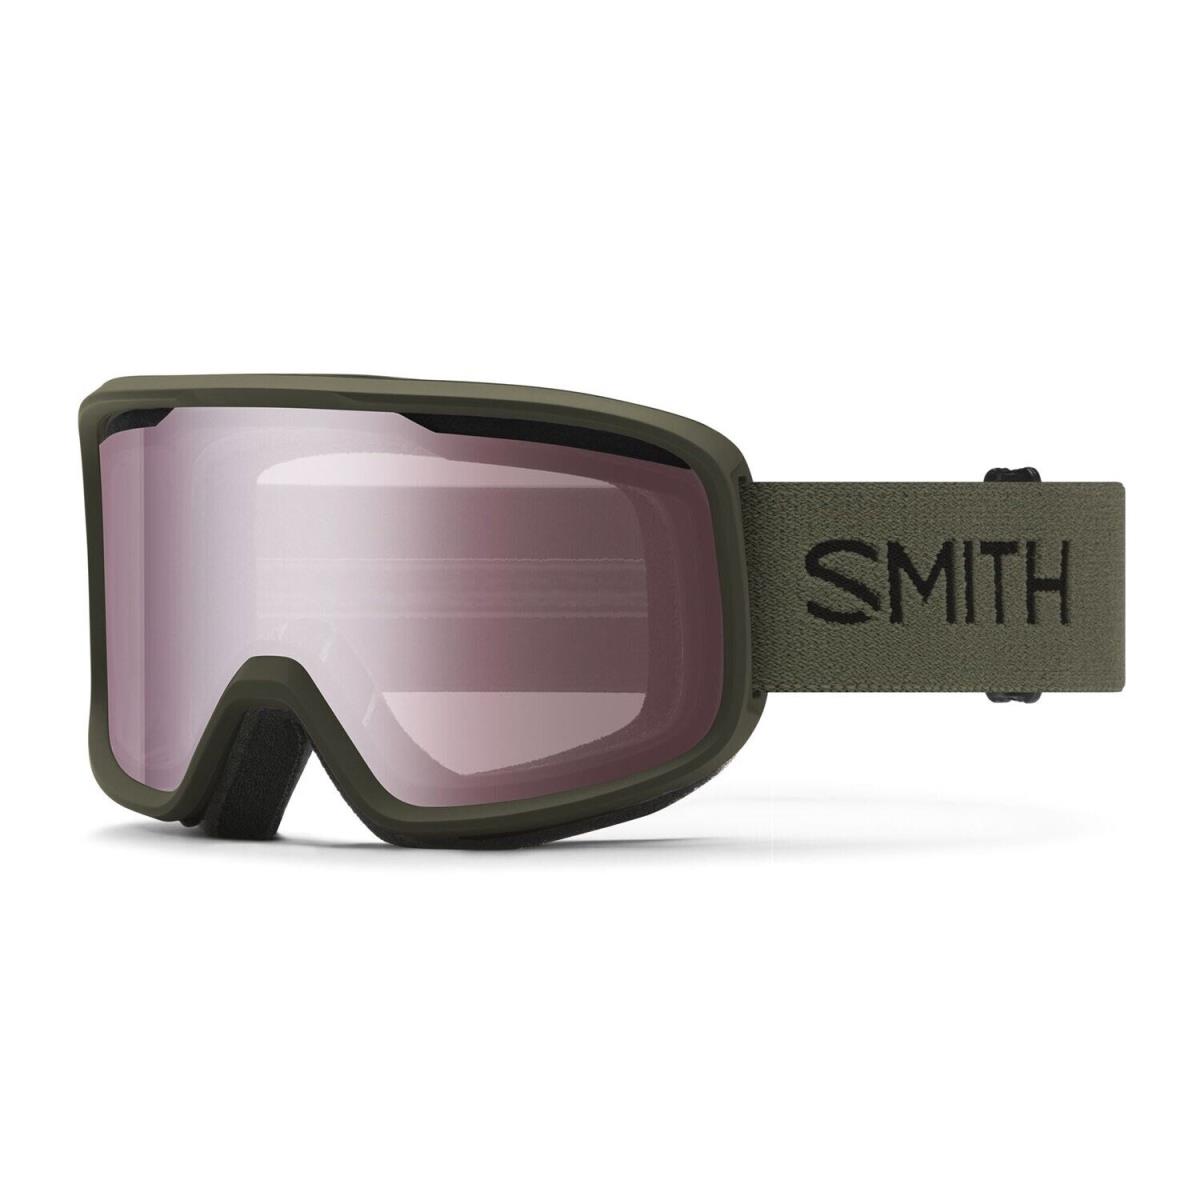 Smith Frontier Ski / Snow Goggles Forest Frame Ignitor Mirror Lens